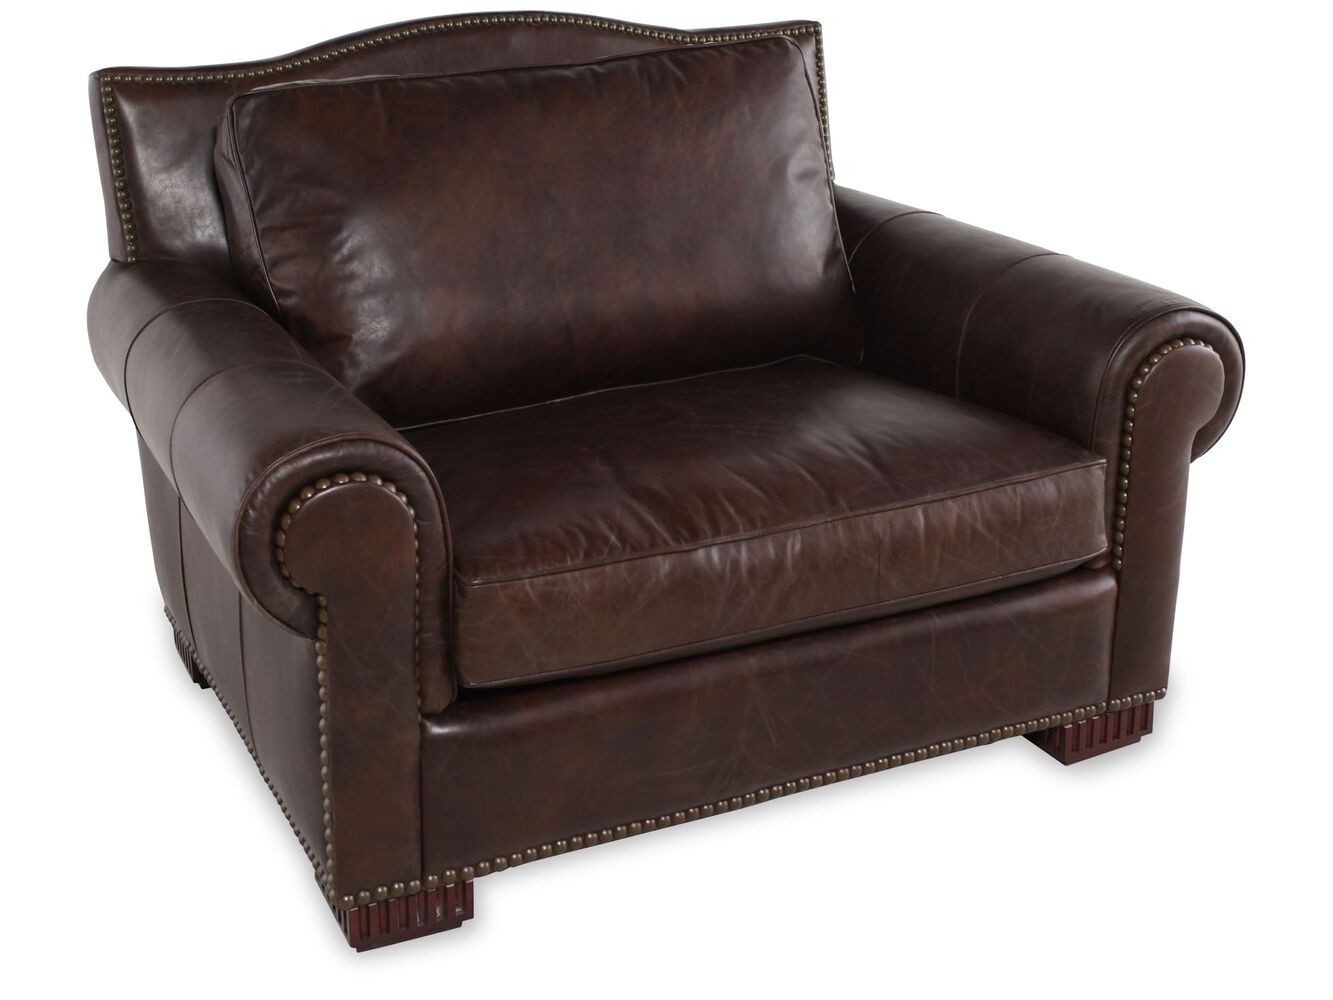 Nailhead trimmed leather chair and a half in dark brown